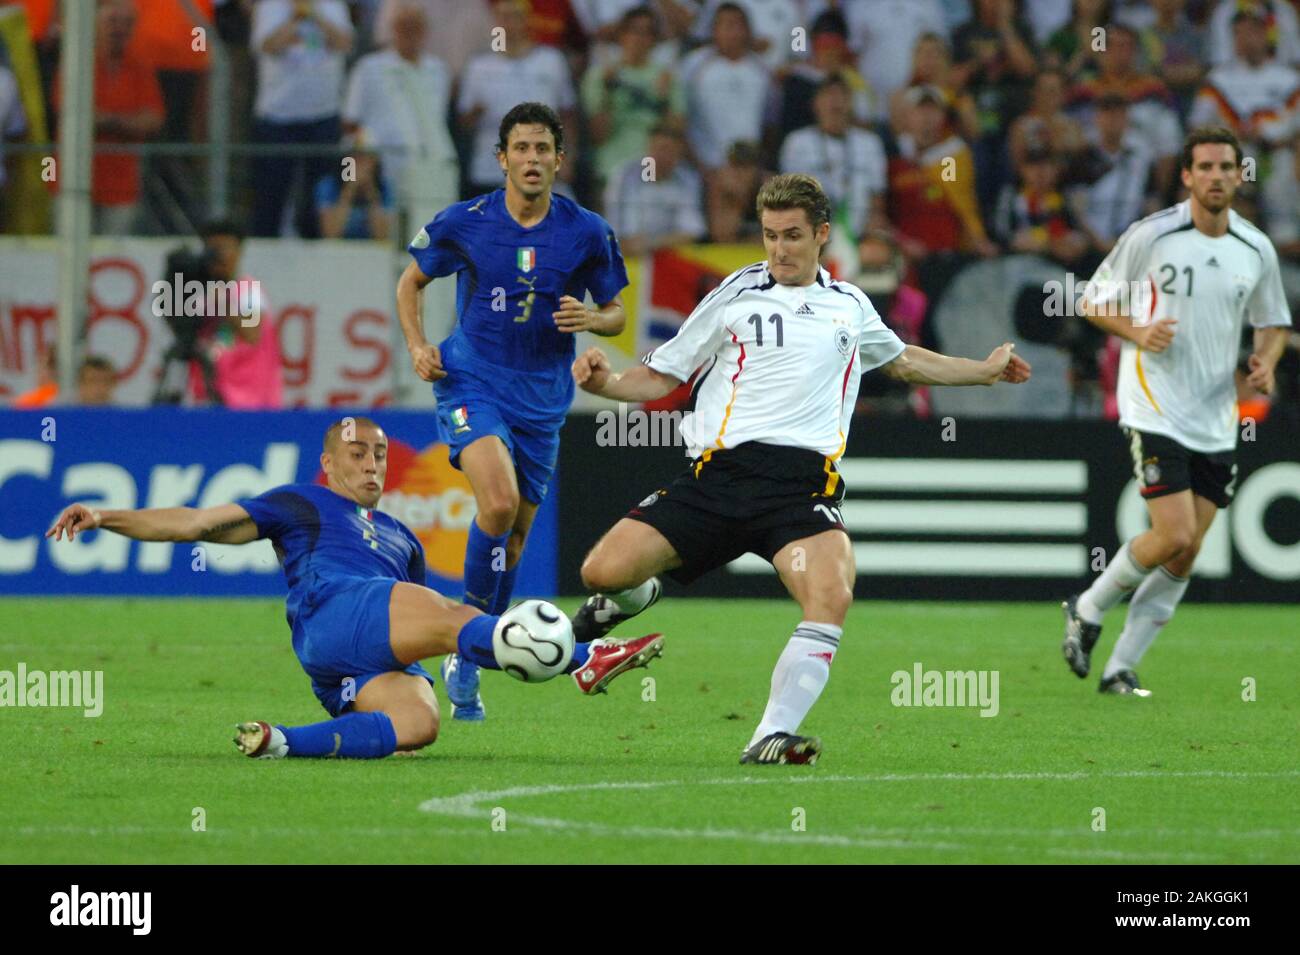 Dortmund Germany, 4 July 2006, FIFA World Cup Germany 2006, Germany-Italy semi-final at the Westfalenstadion: Miroslav Klose and Fabio Cannavaro in action during the  match Stock Photo